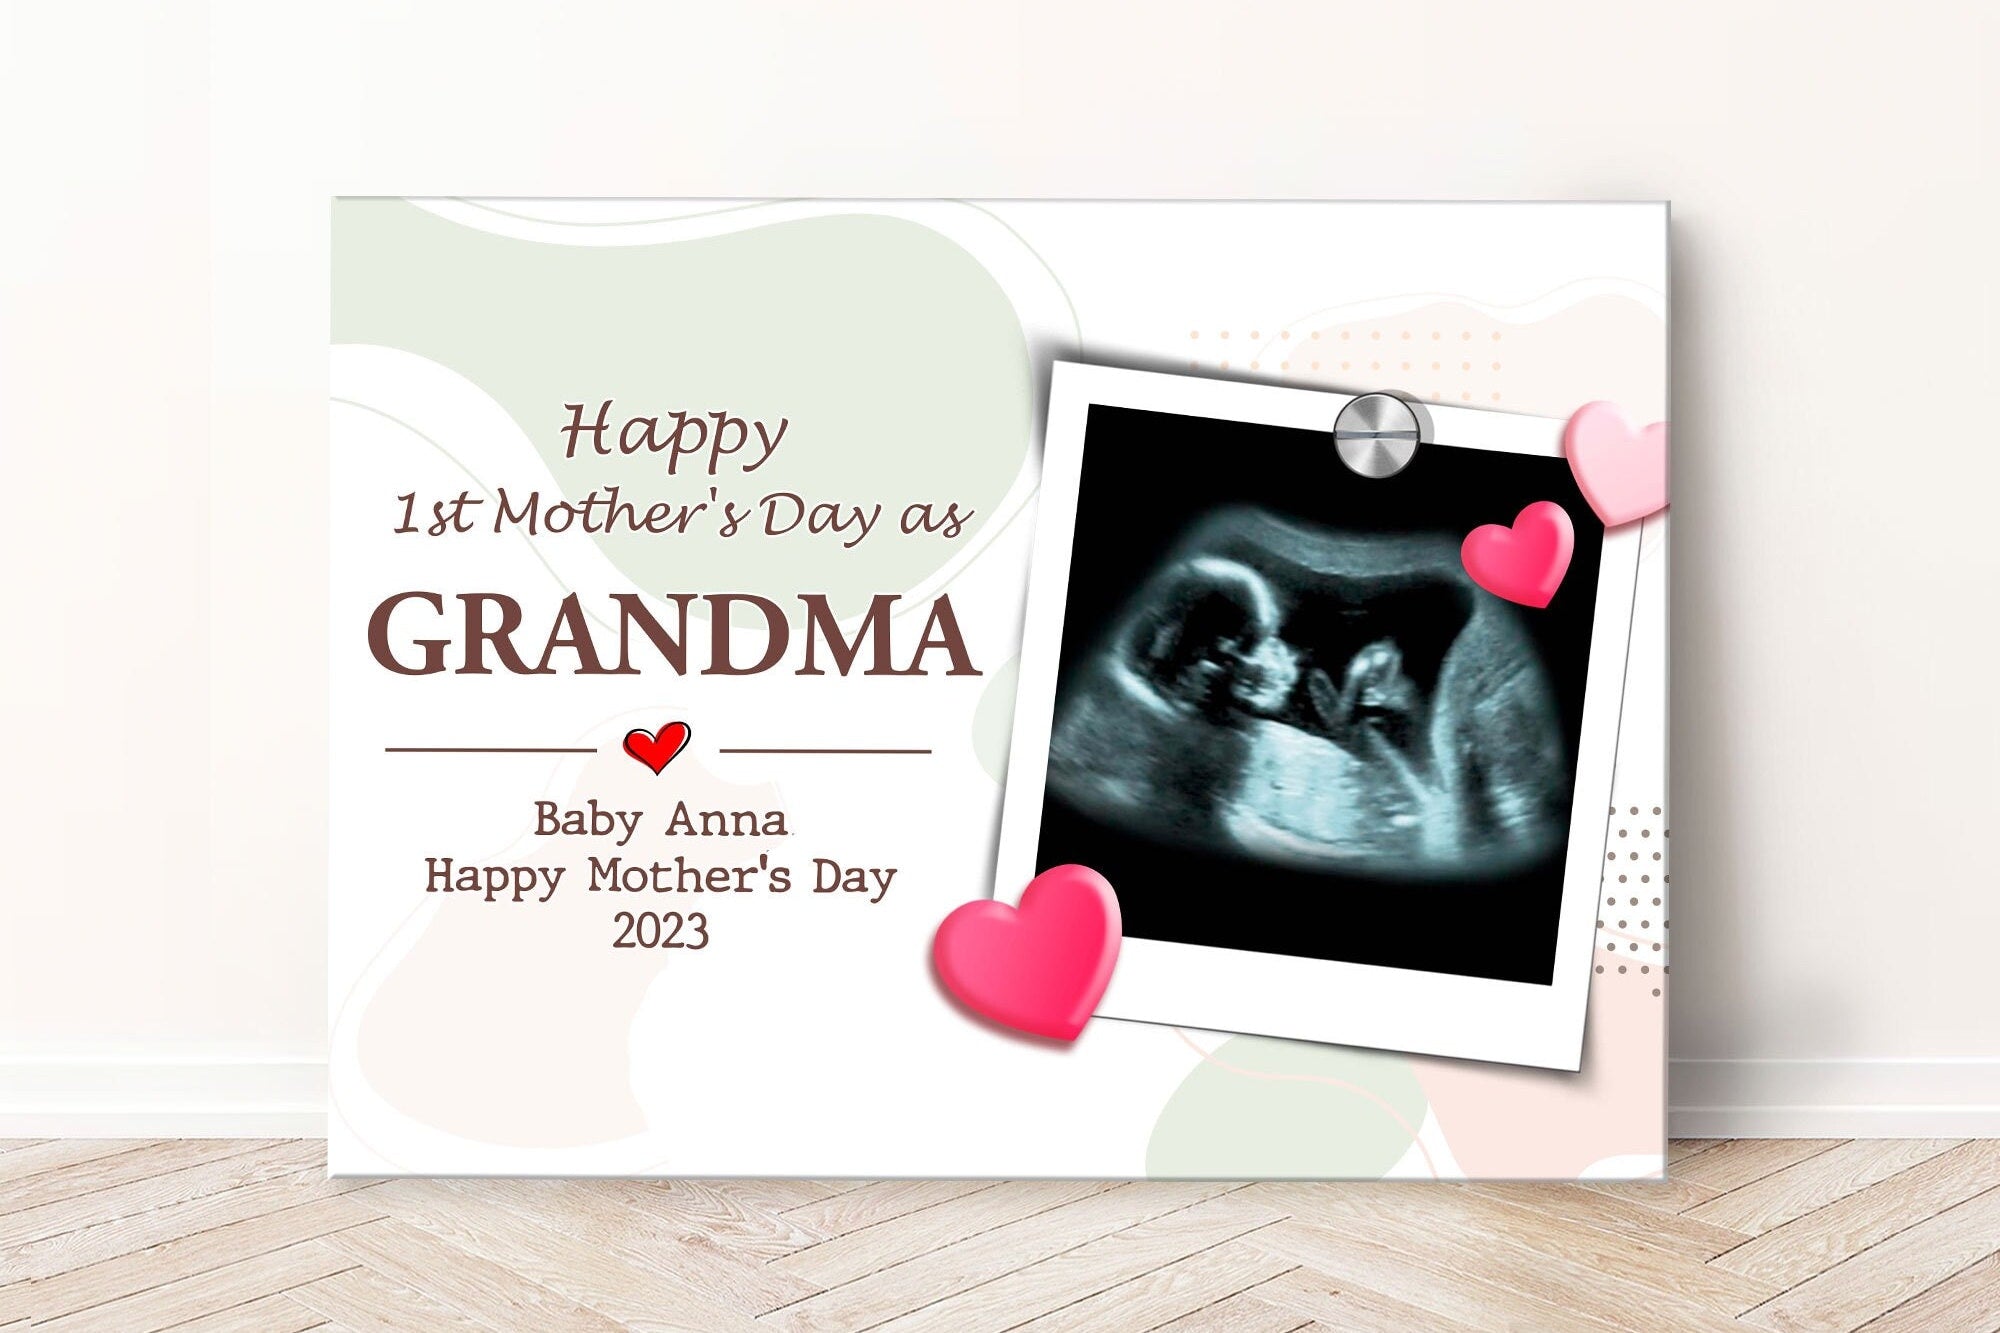 Personalized Grandma Poster/Canvas, 1st Mother's Day as Grandma Wall Art Print, Custom Ultrasound Photo Framed Canvas, Gift for Mom, Grandma